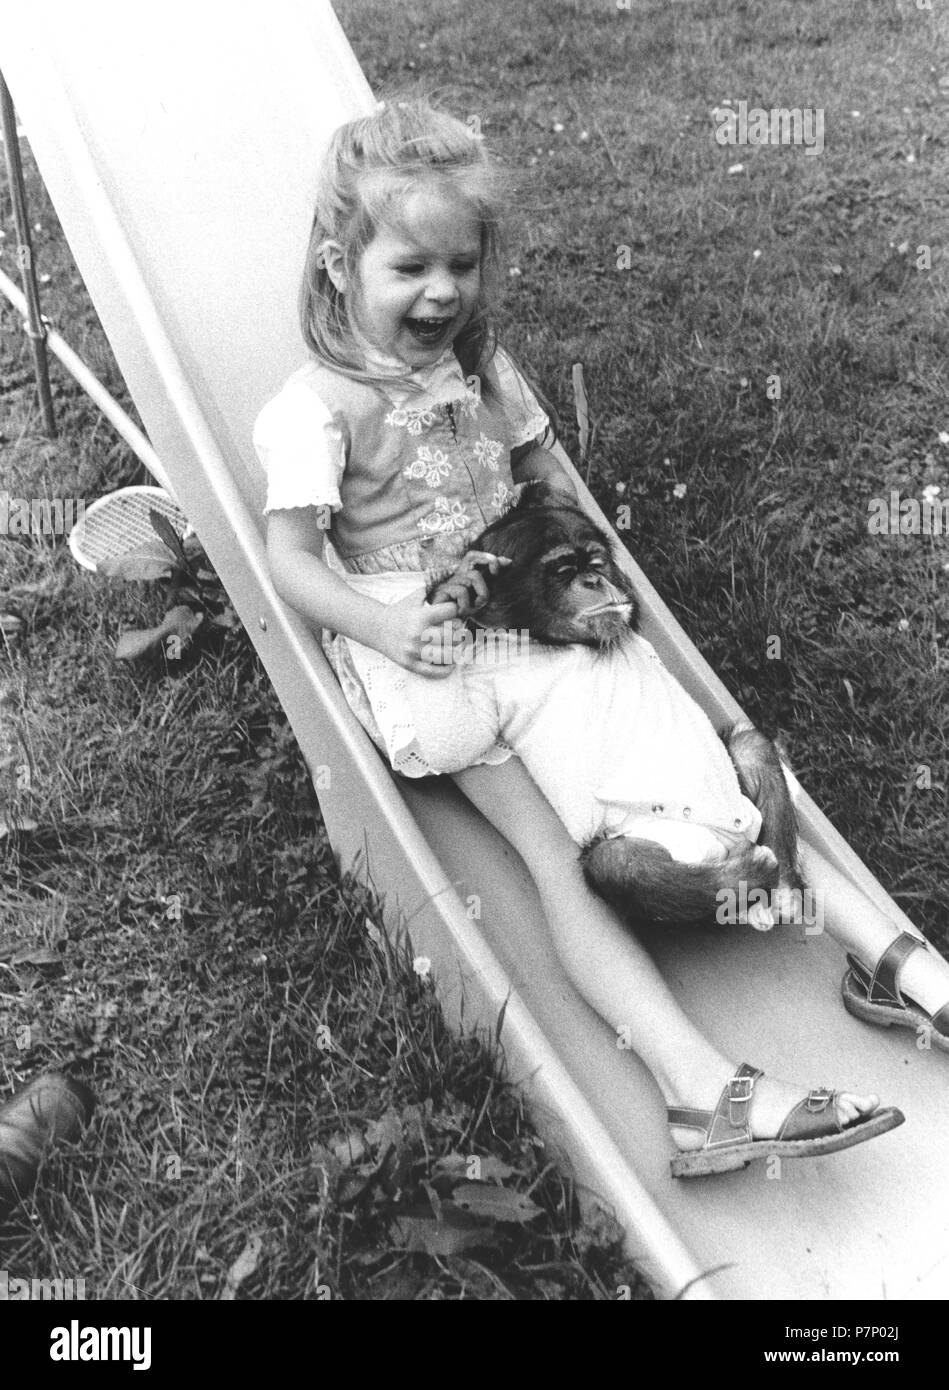 Girl and chimpanzee on the slide, England, Great Britain Stock Photo